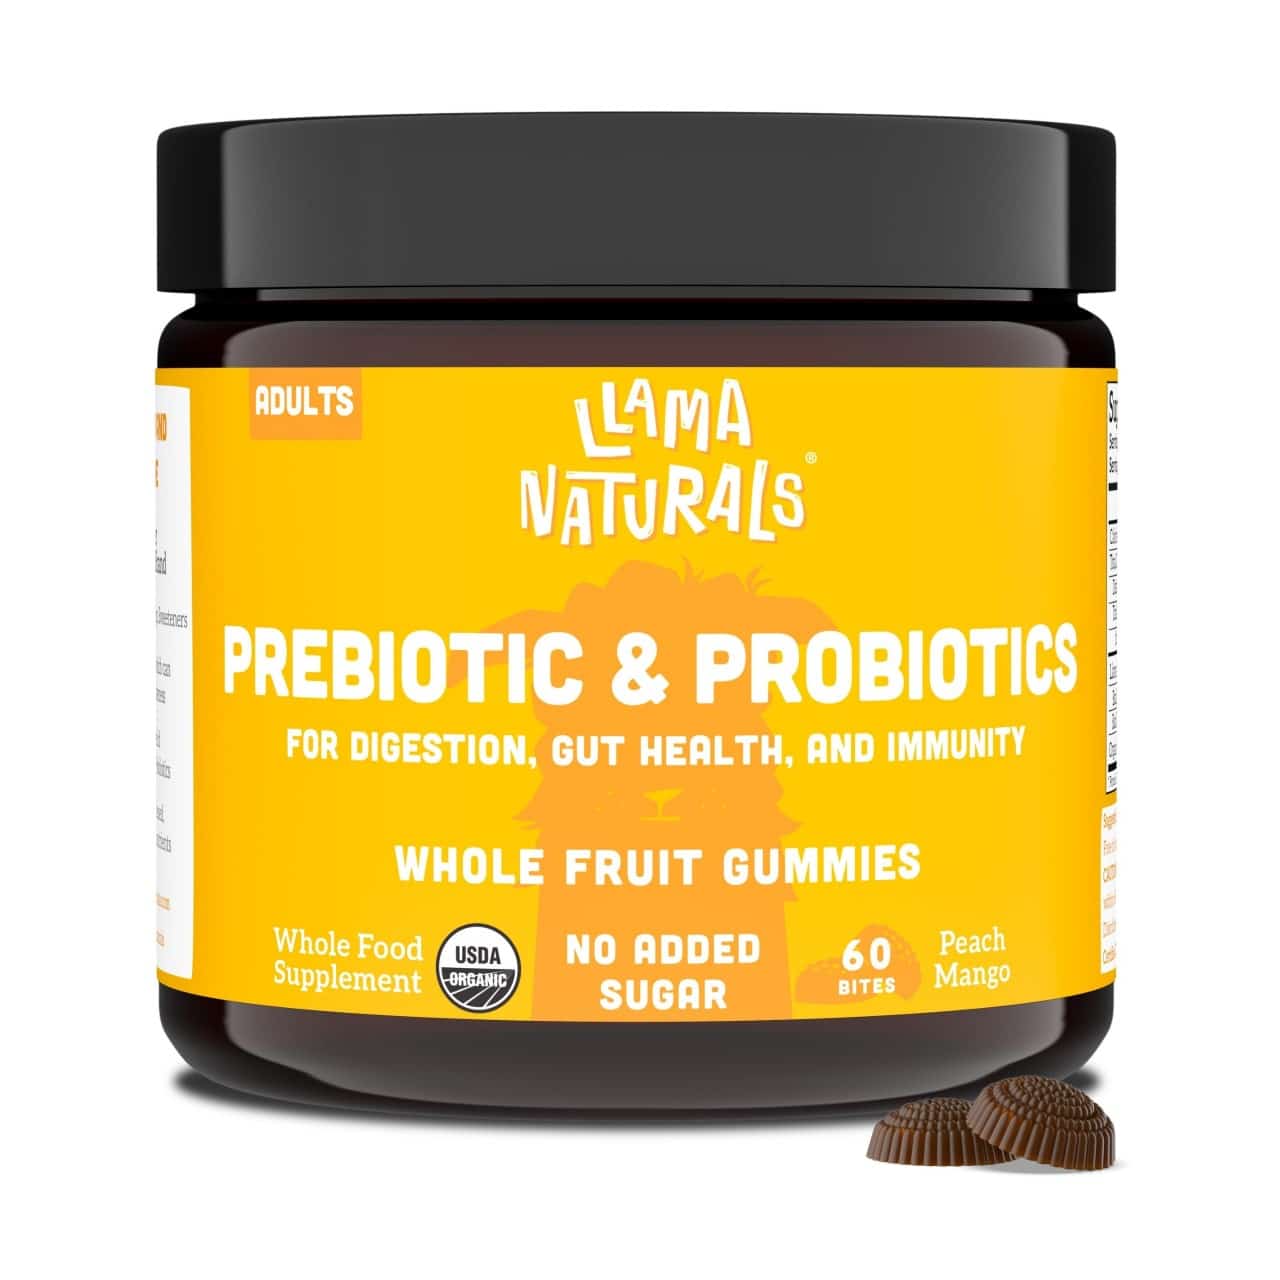 Llama Naturals Adults Organic Prebiotic and Probiotic Gummies from Gimme the Good Stuff 001